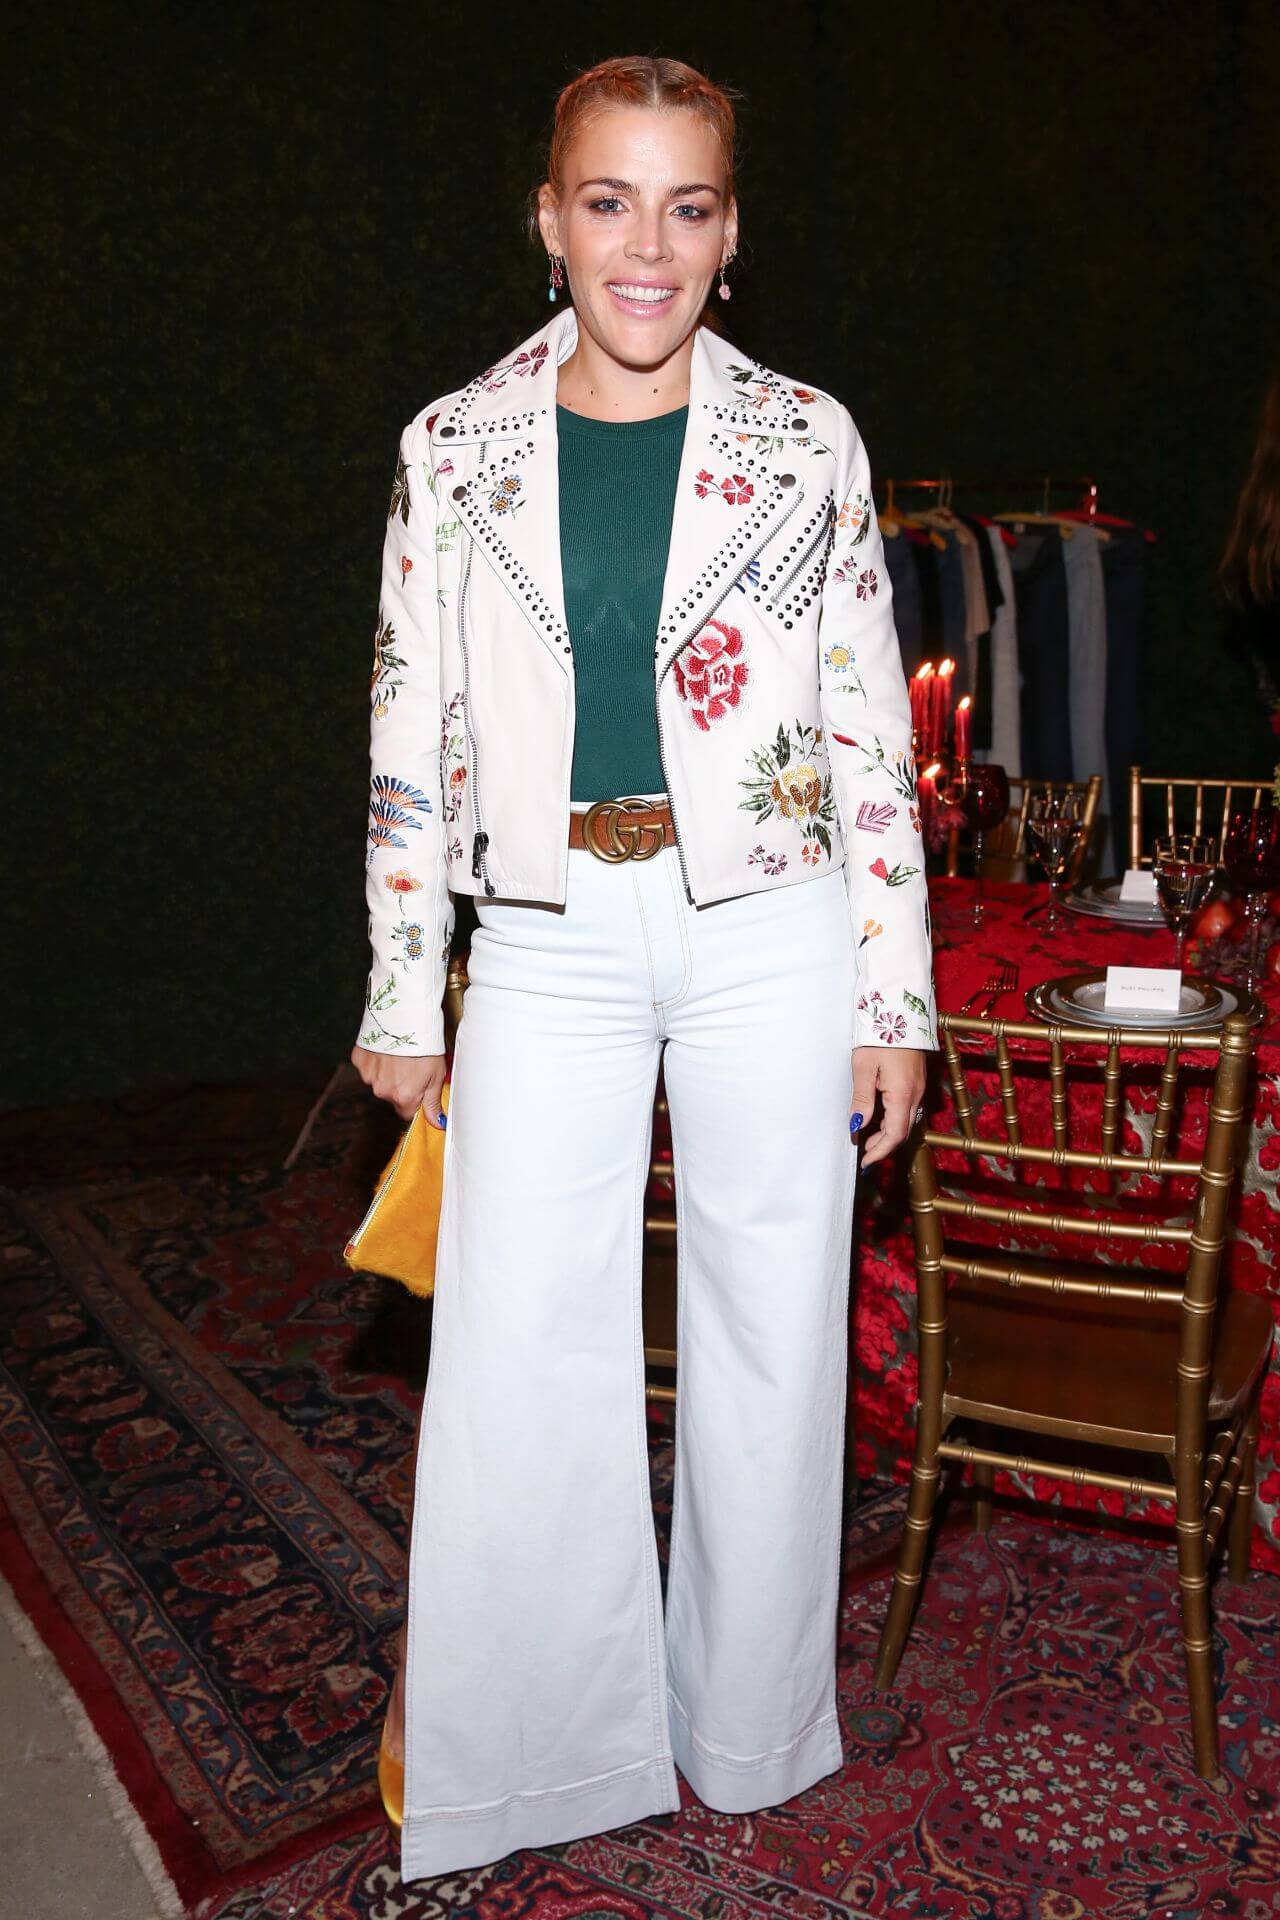 Busy Philipps  In White Embroidery Jacket Under Green Top With Flare Pants At Alice & Olivia Denim Launch Party in Los Angeles